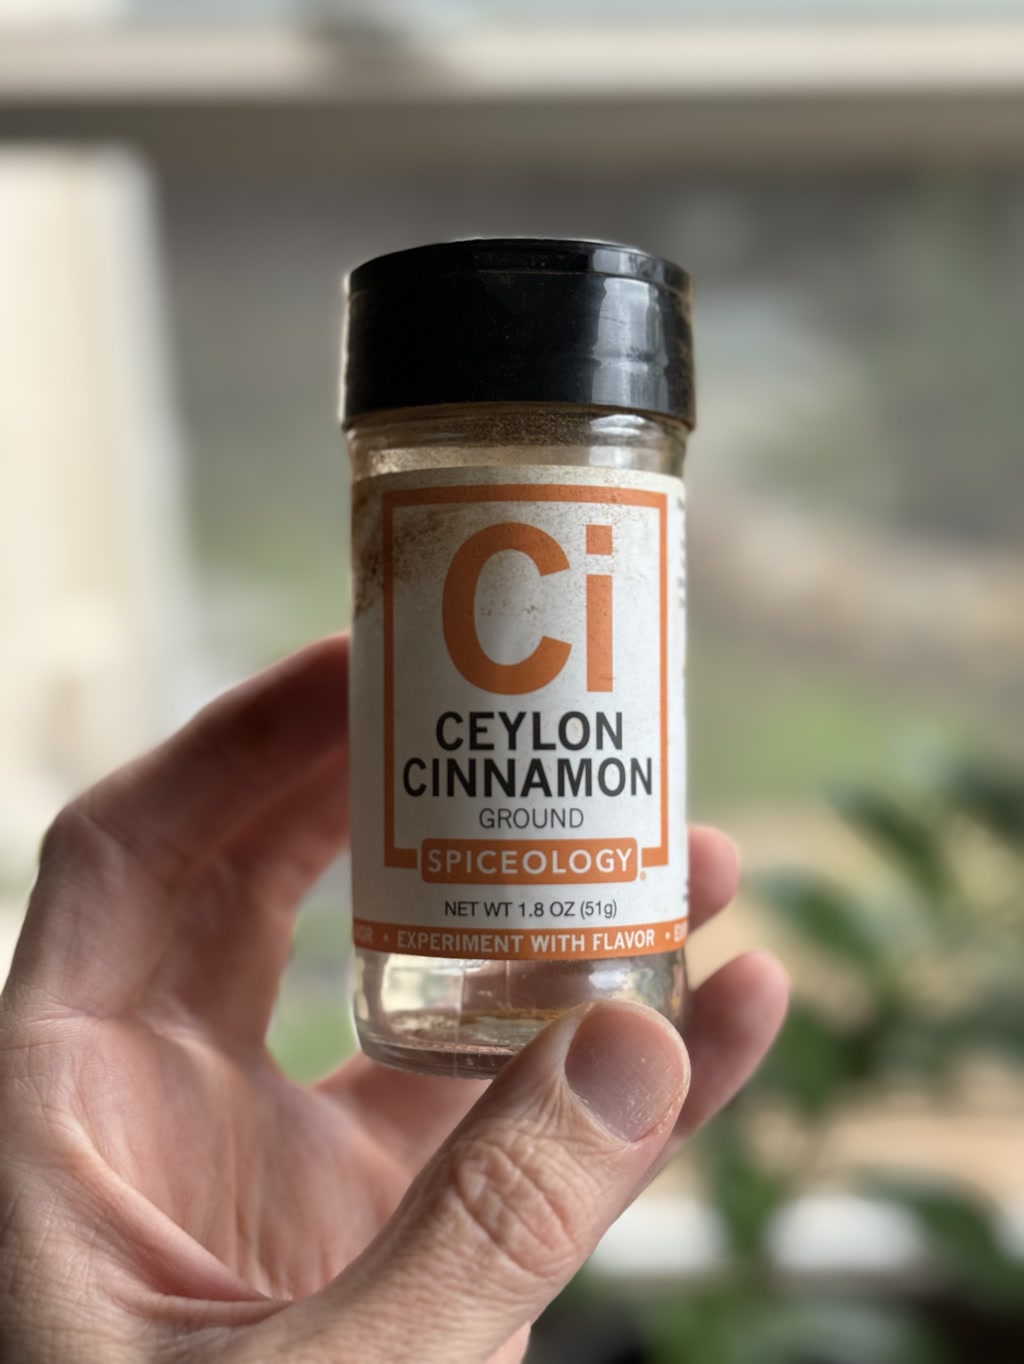 A hand is holding a jar of ground Ceylon Cinnamon by Spiceology. The label on the jar is predominantly white and orange with text providing product information. The jar has a black lid, and the contents are visible through the glass. In the background, there appears to be a blurred indoor environment with daylight coming through a window.